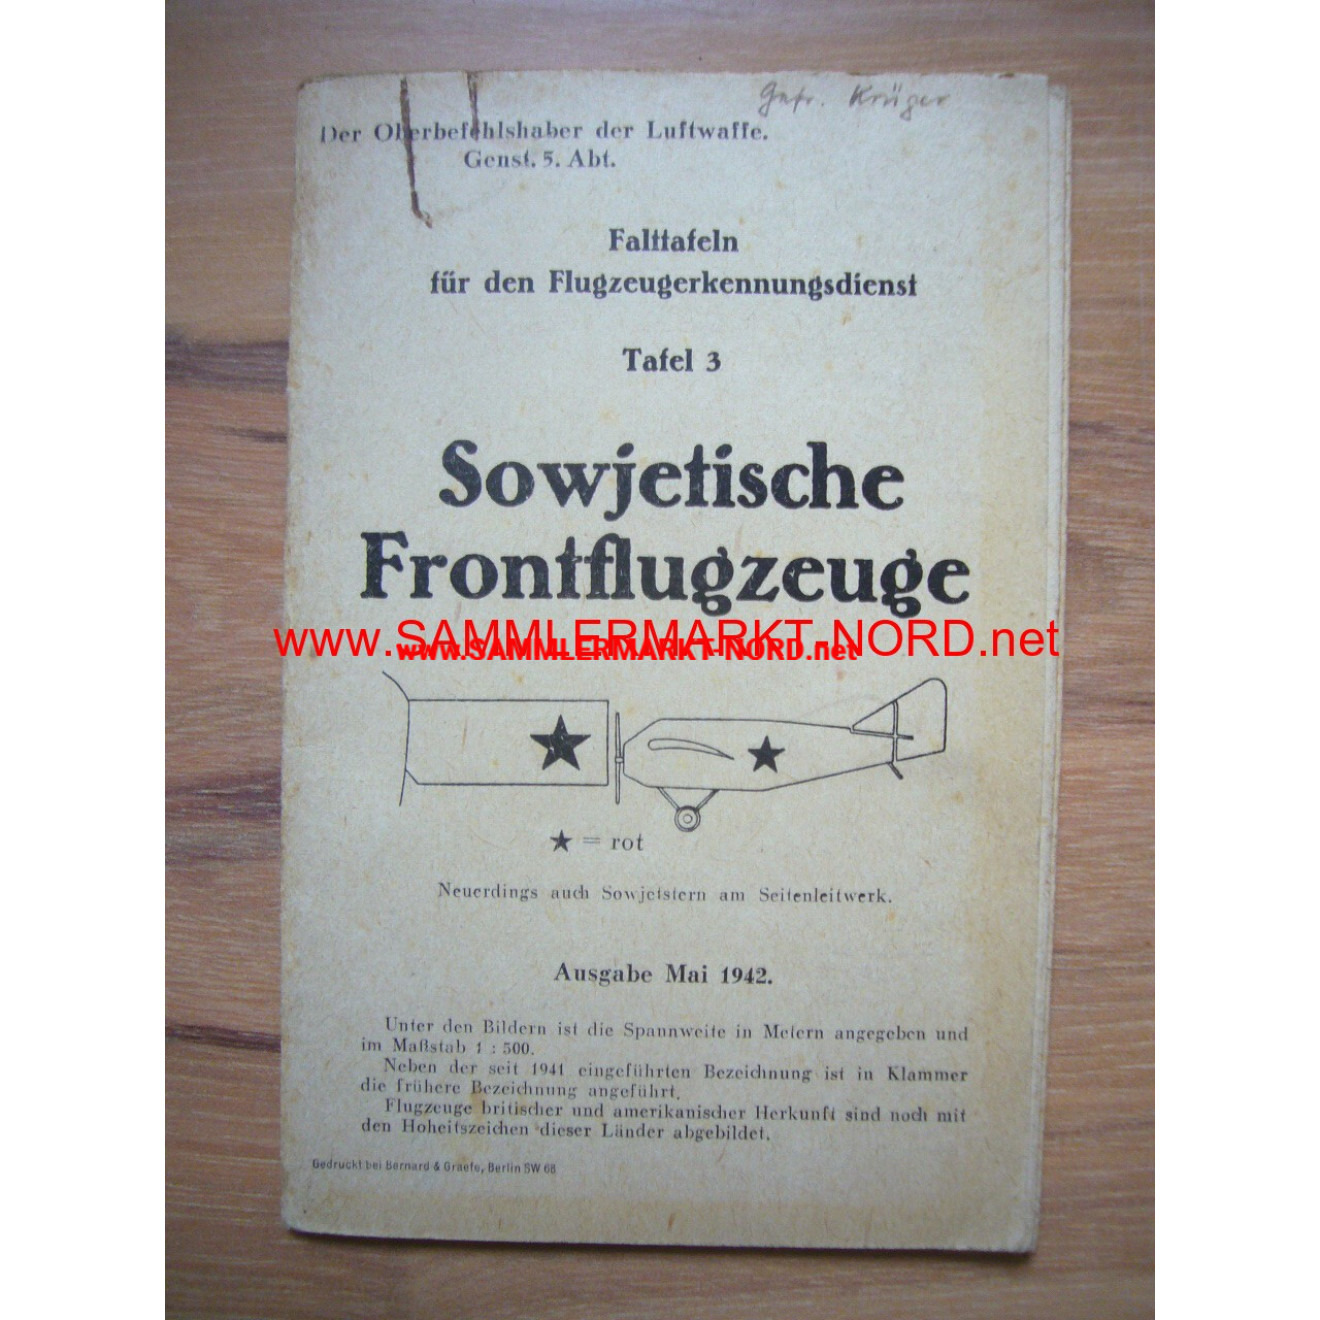 Folding card for the aircraft detection service - card 3 - Sovie